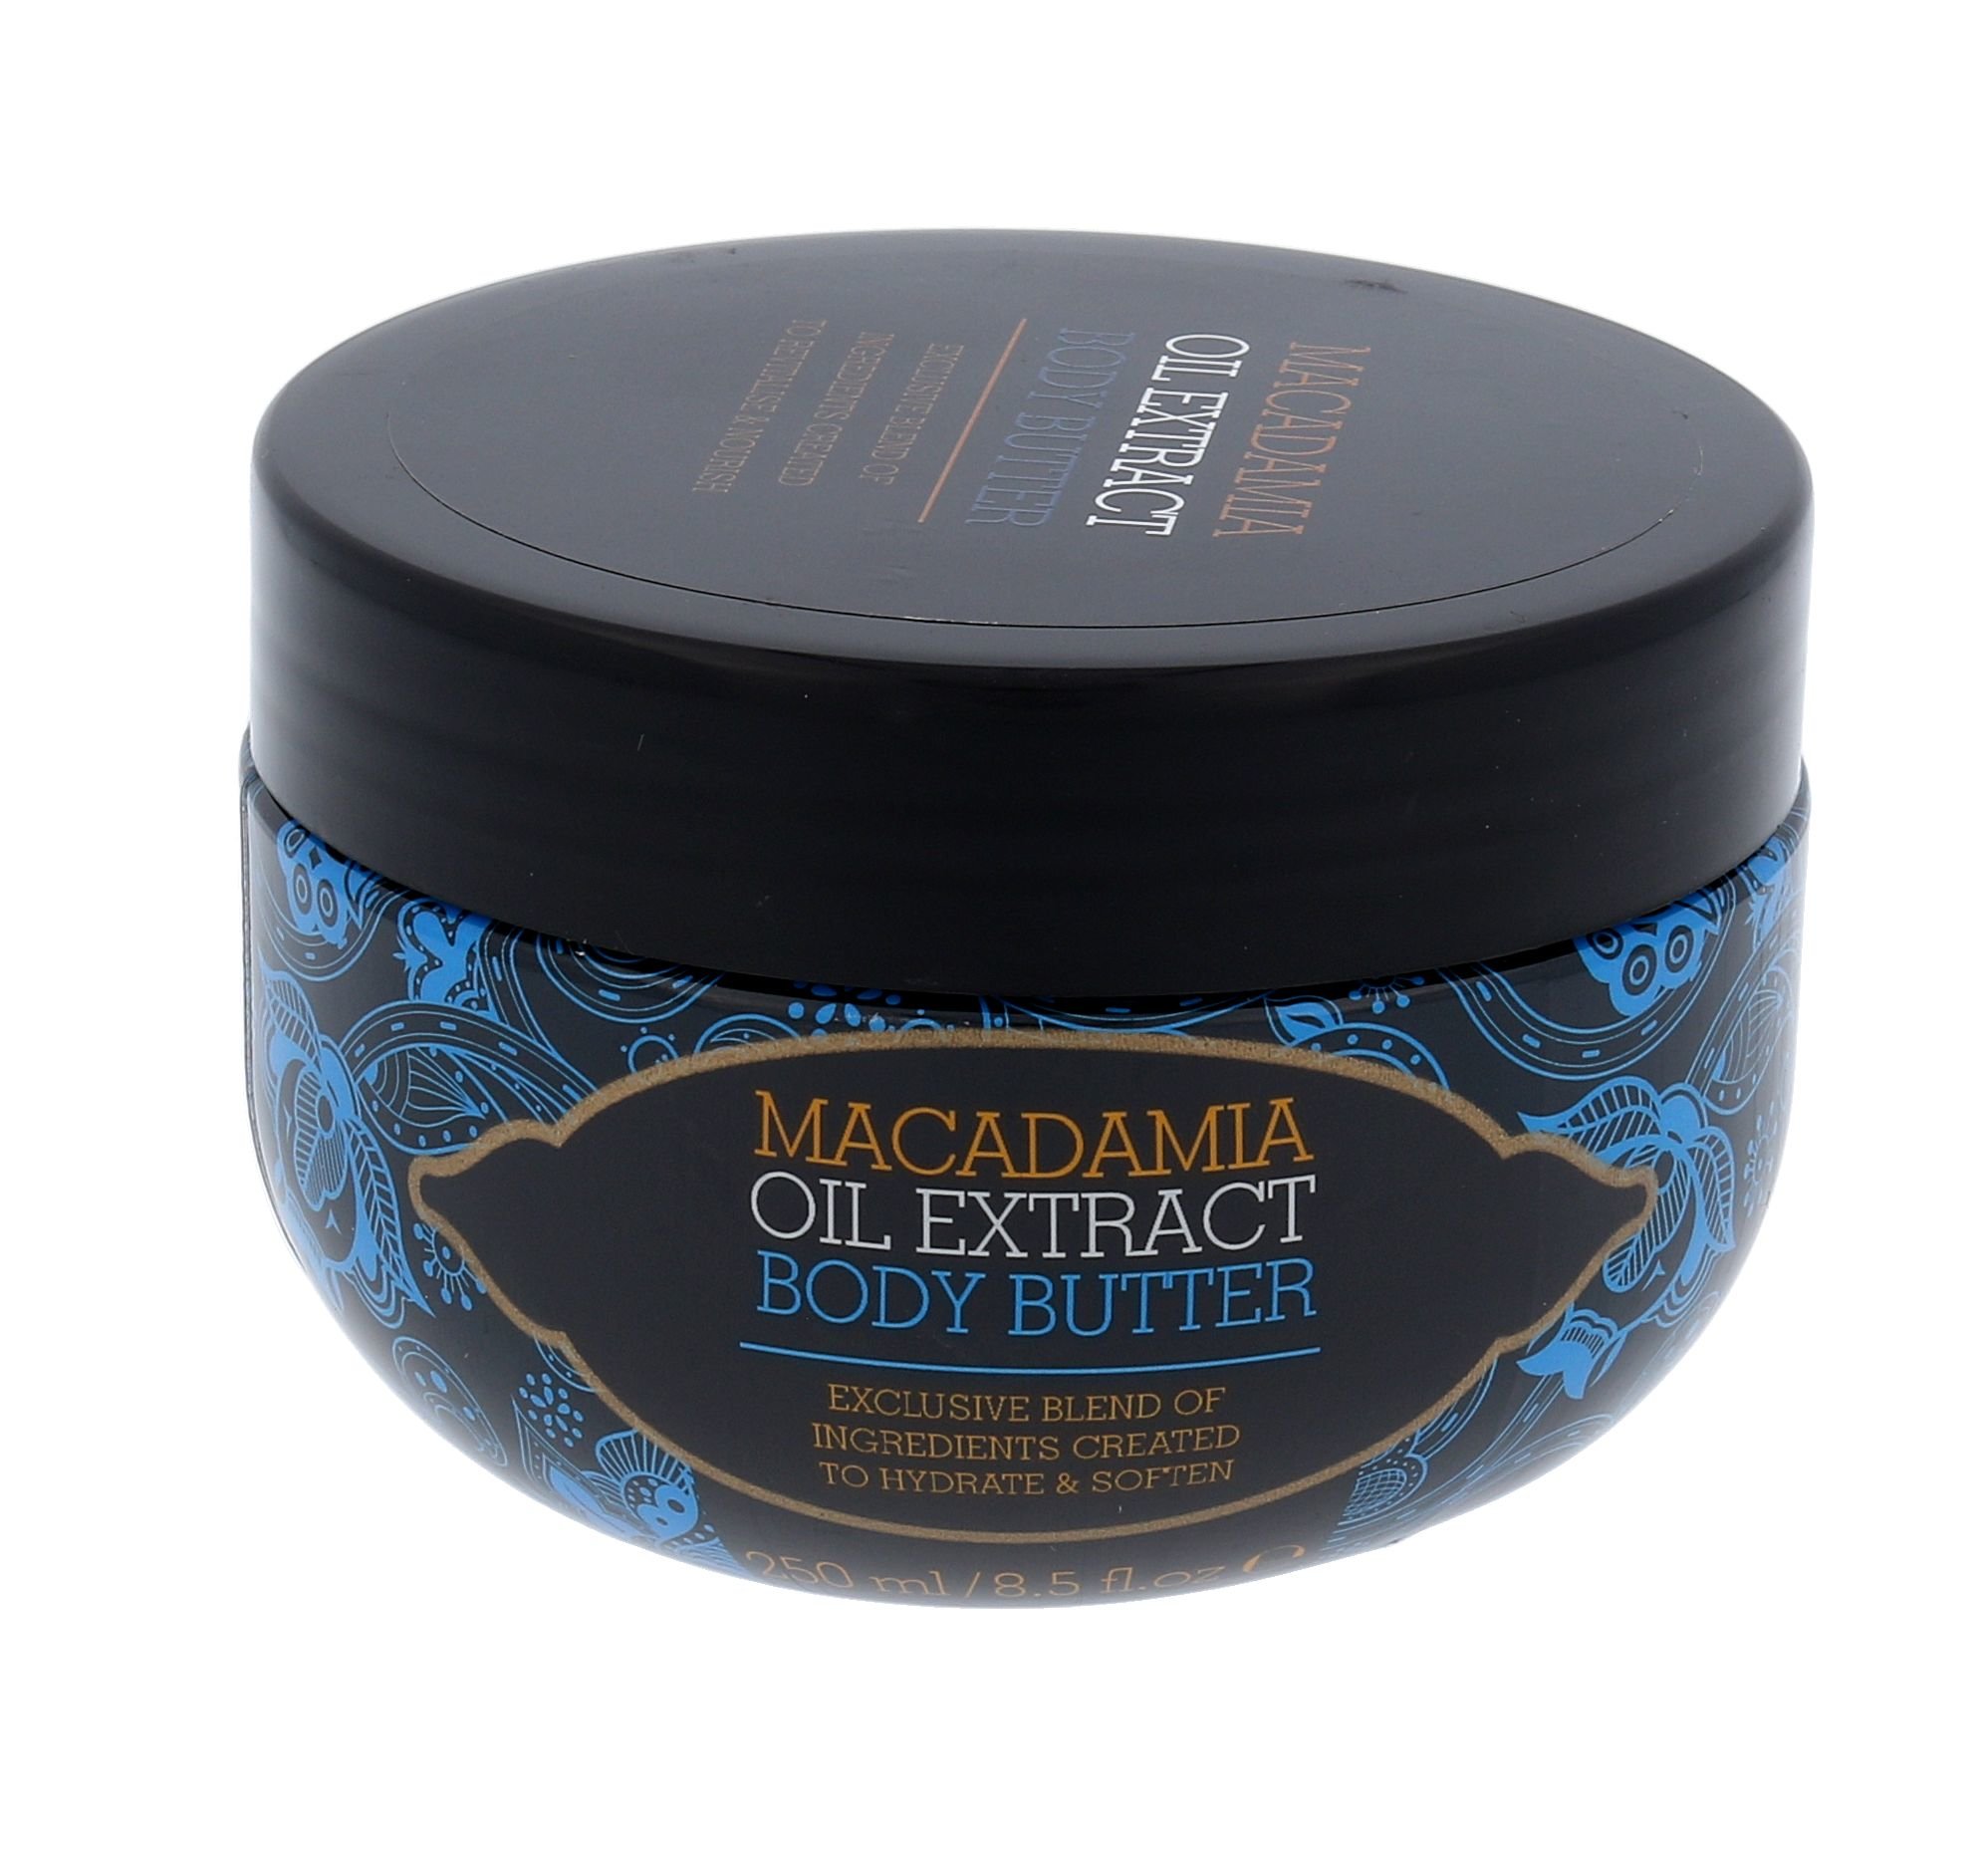 Macadamia Oil Extract Body Butter